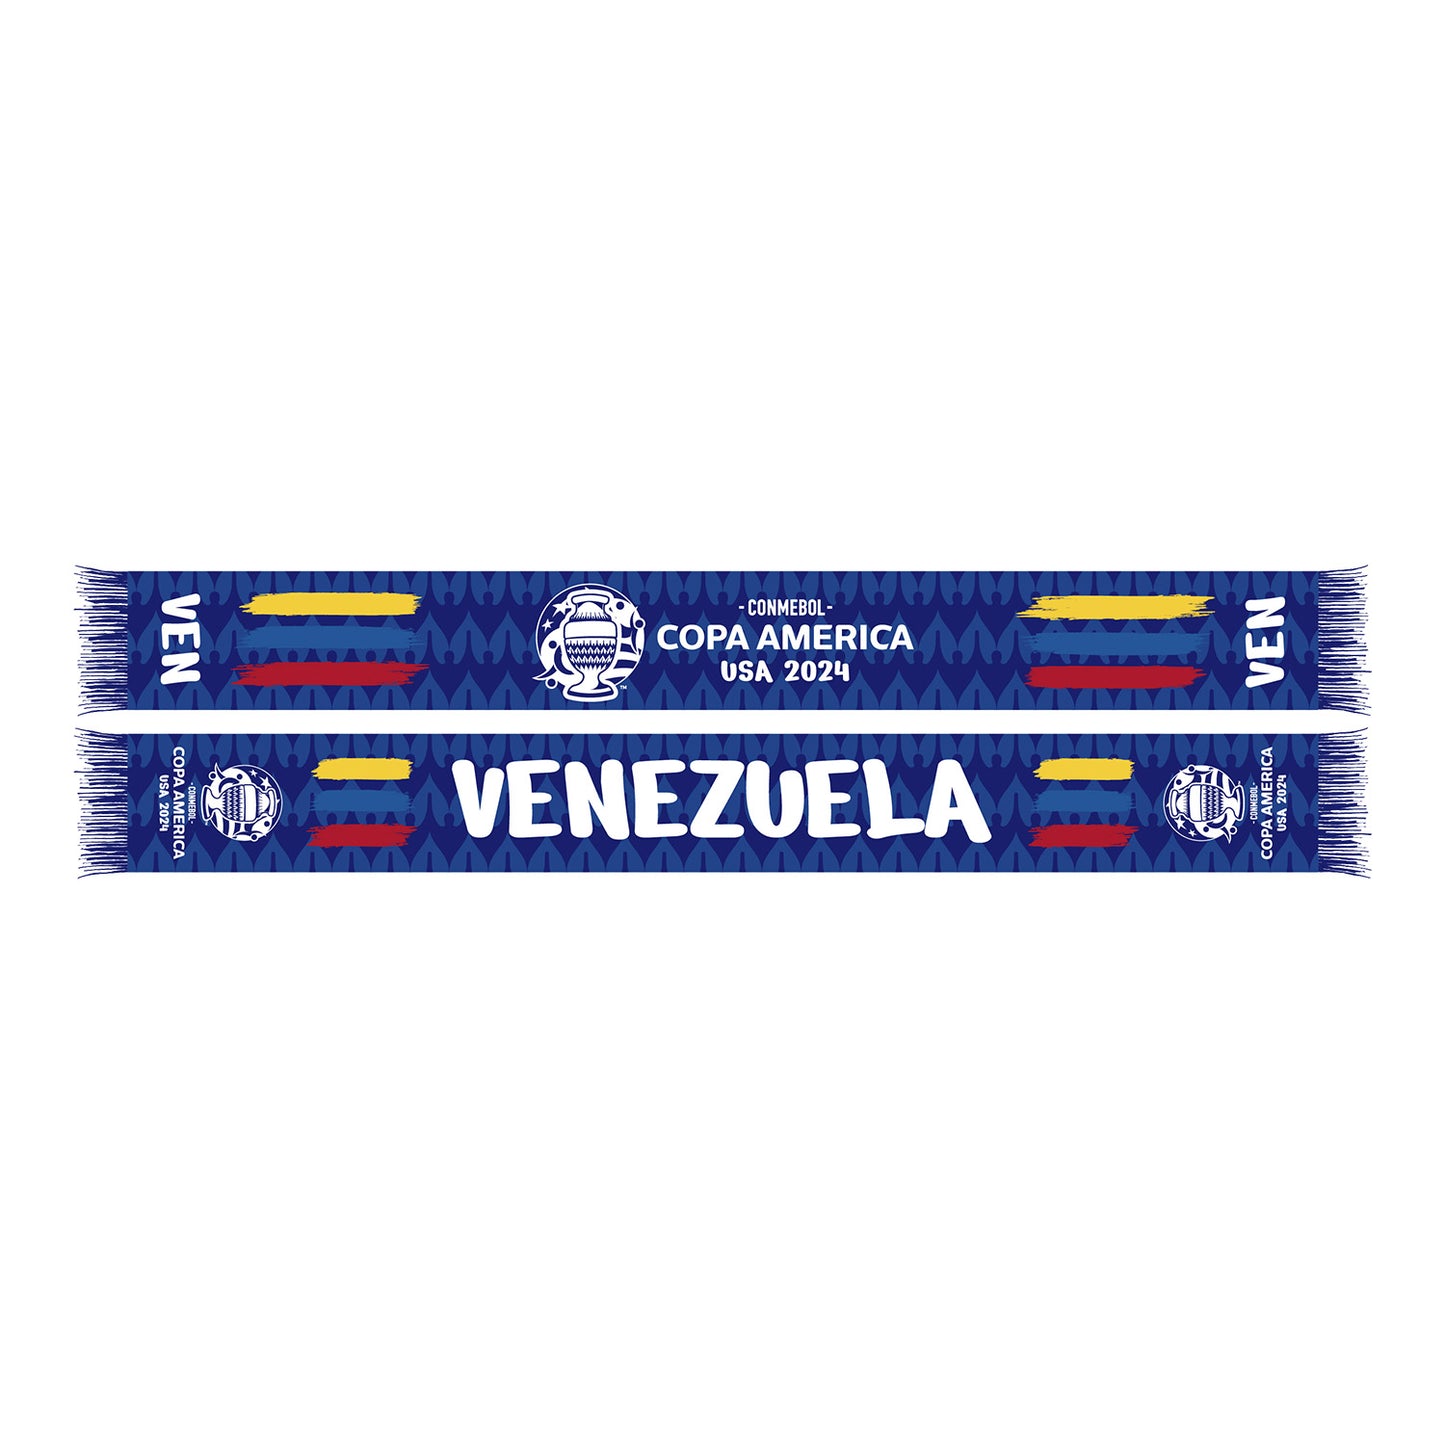 Venezuela COPA America Scarf - Front and Back View